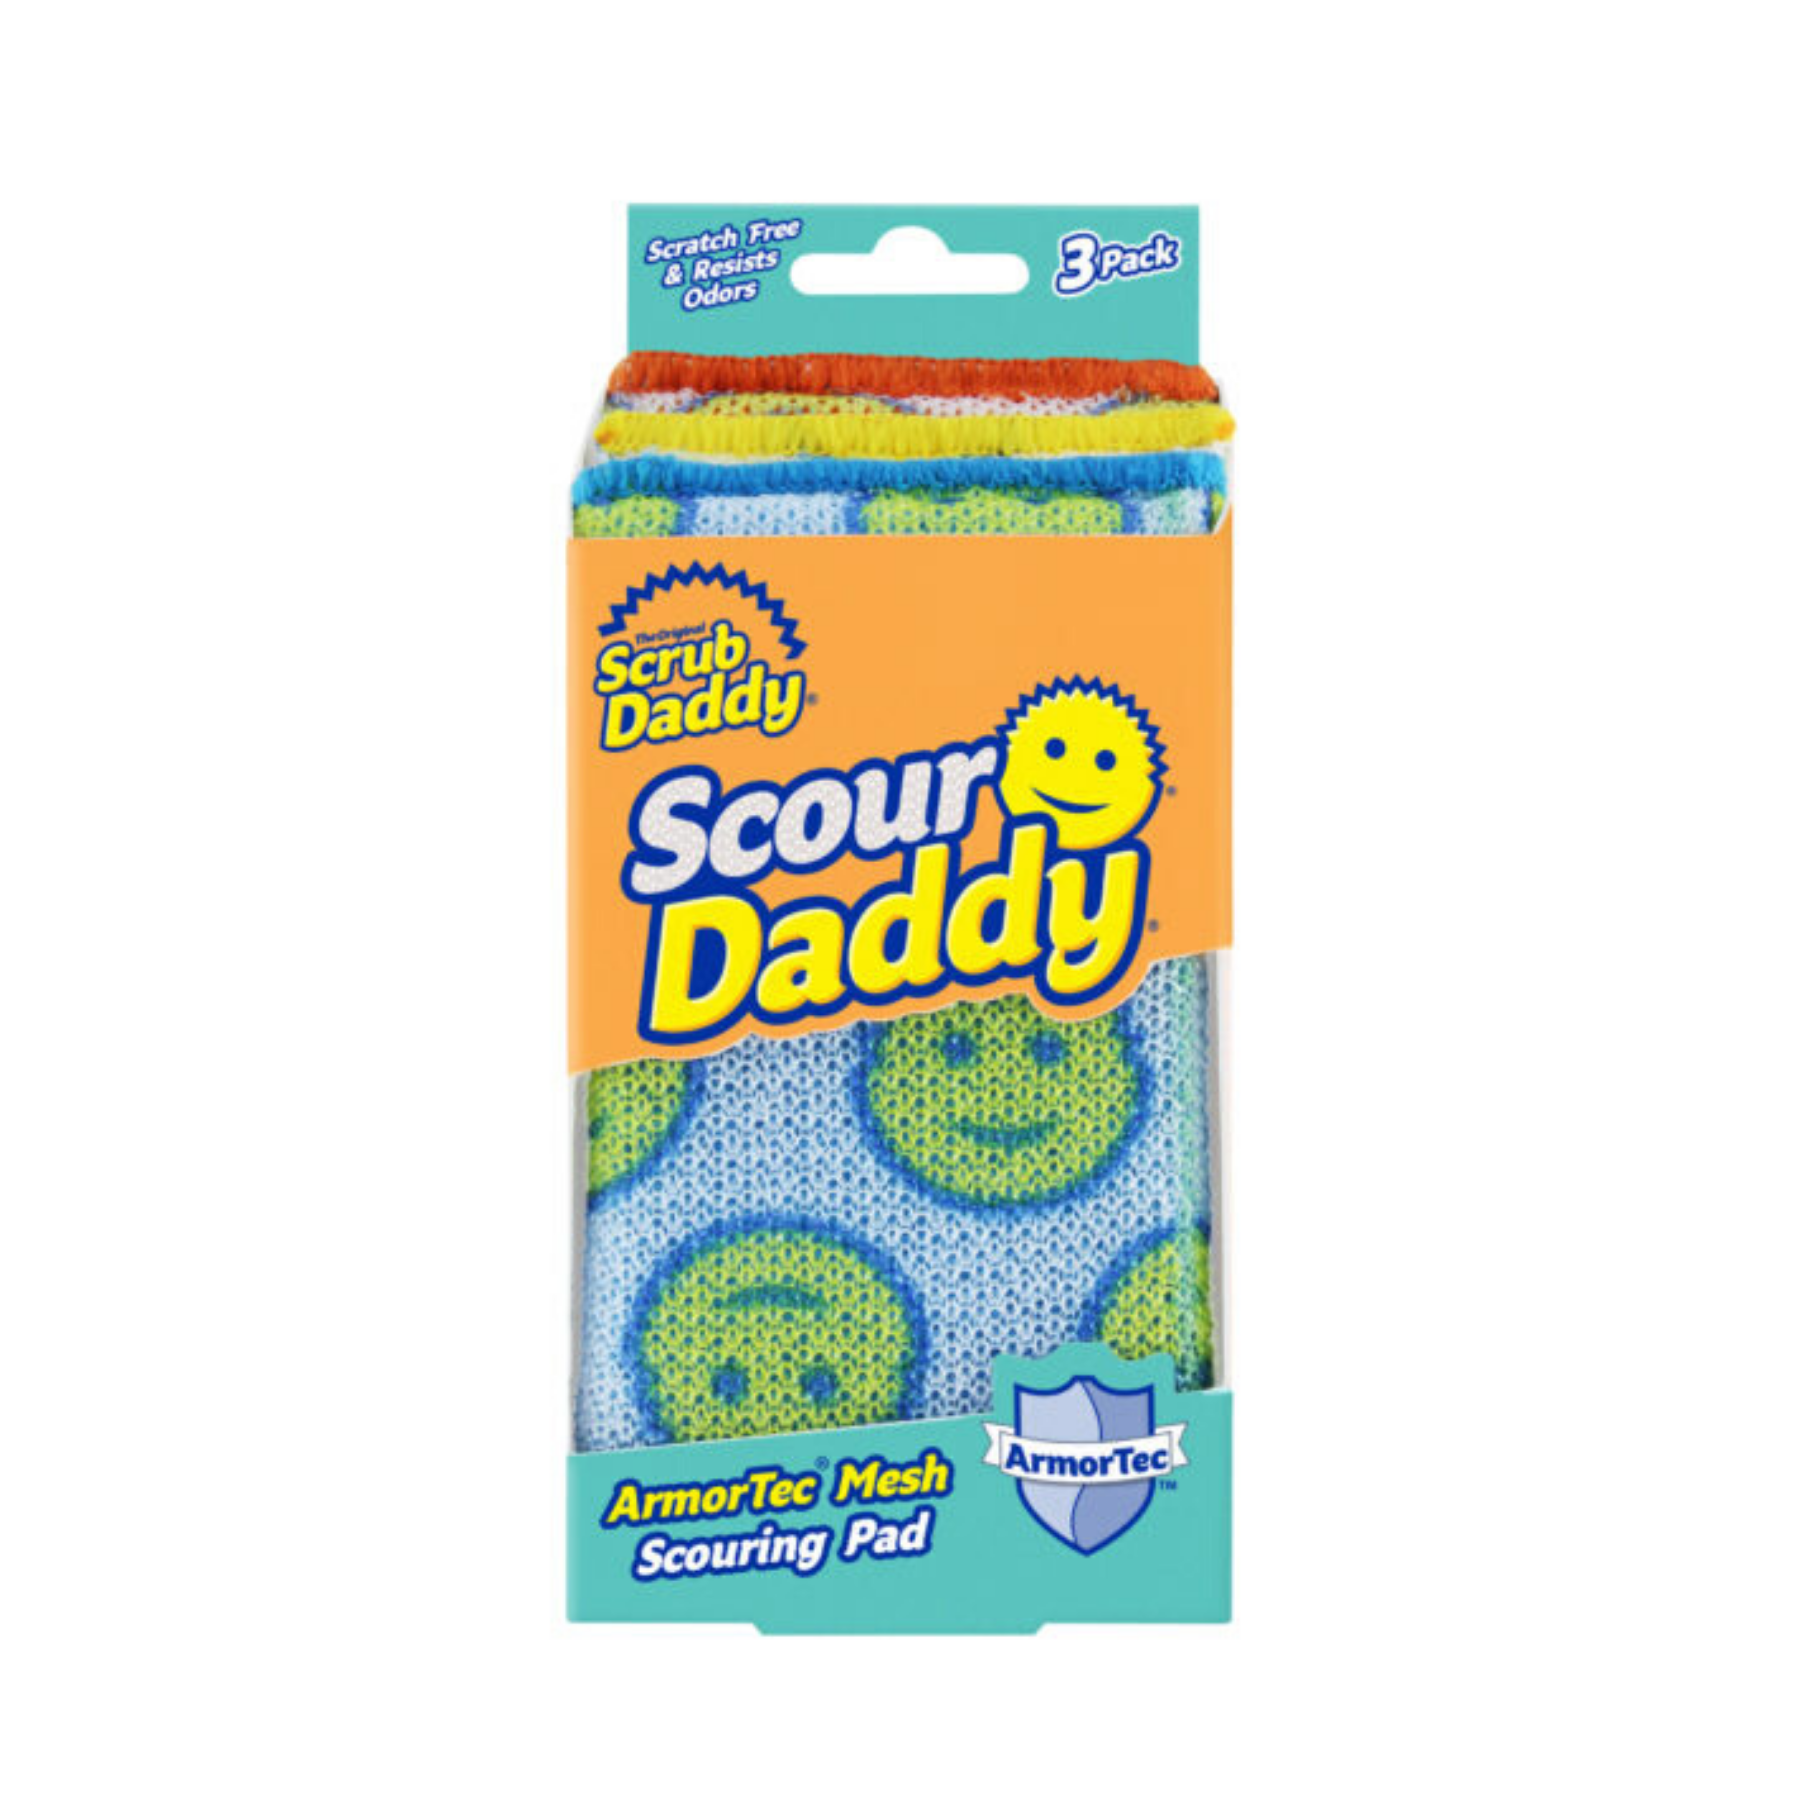 Scrub Daddy Scour Pads - Scour Daddy - Multi-Surface Scouring Pad,  Absorbent, Durable, FlexTexture Sponge, Soft in Warm Water, Firm in Cold,  Scratch